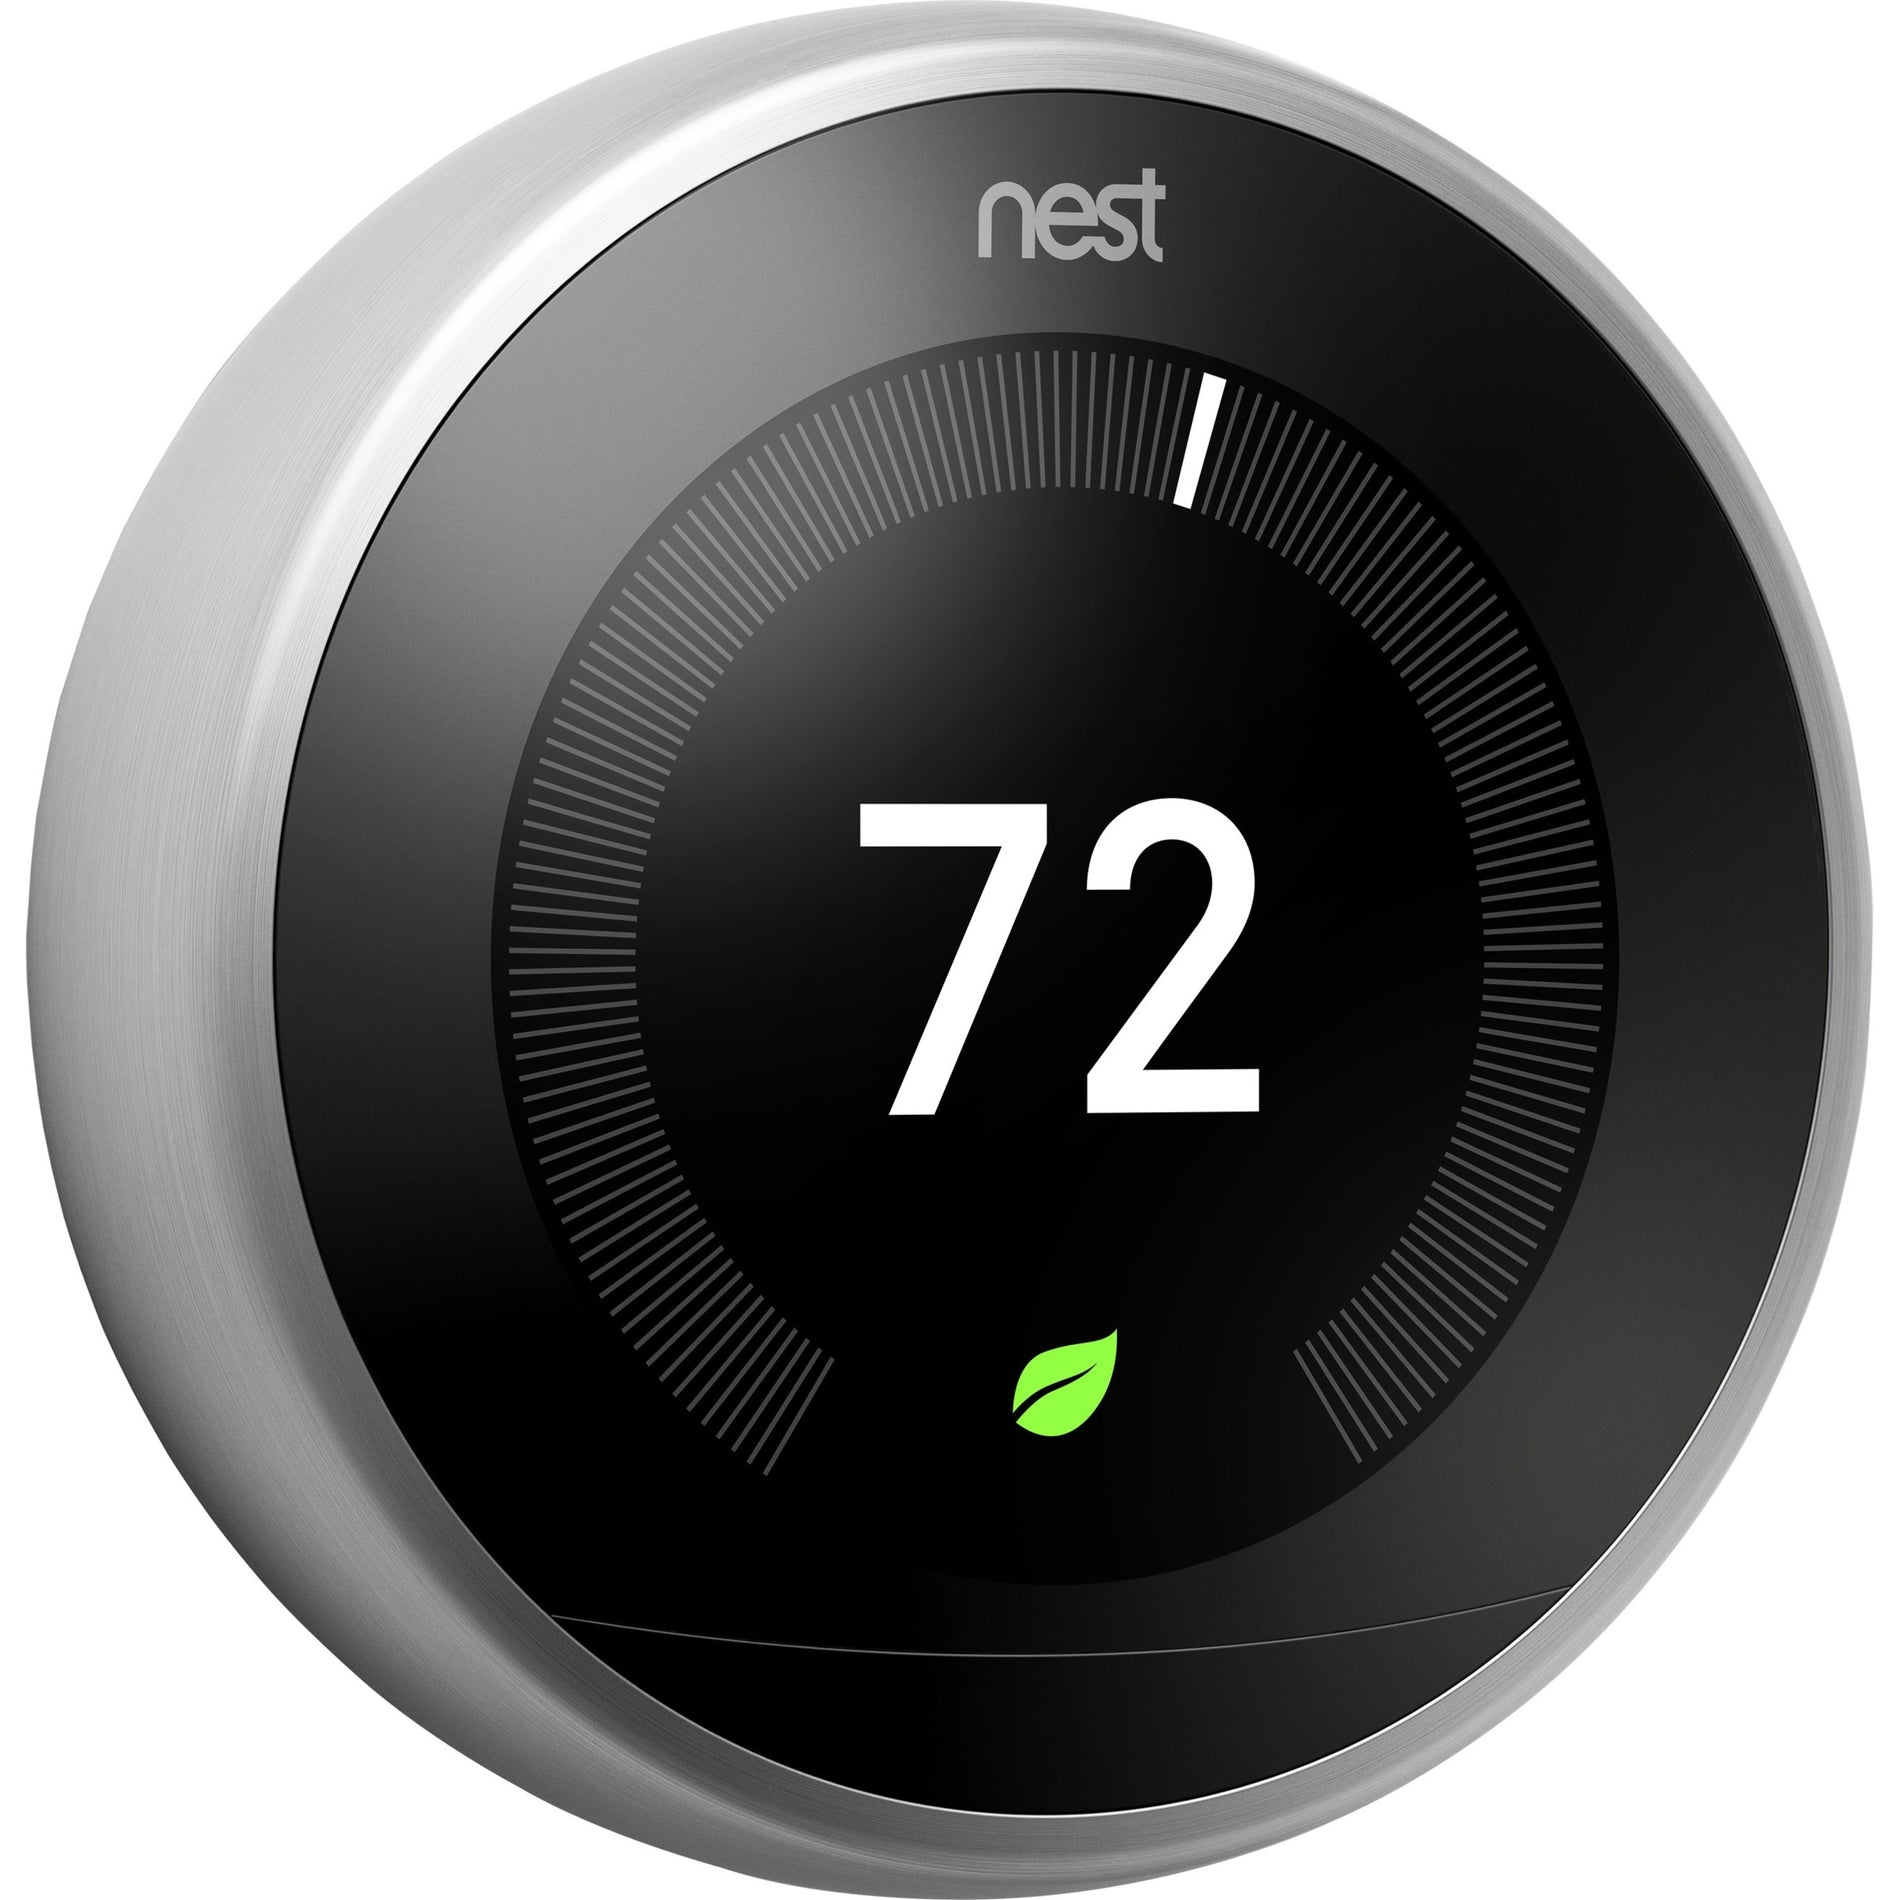 Google Nest T3019US Learning Thermostat, Energy Star, Tablet, PC, Home, Smartphone, Polished Steel